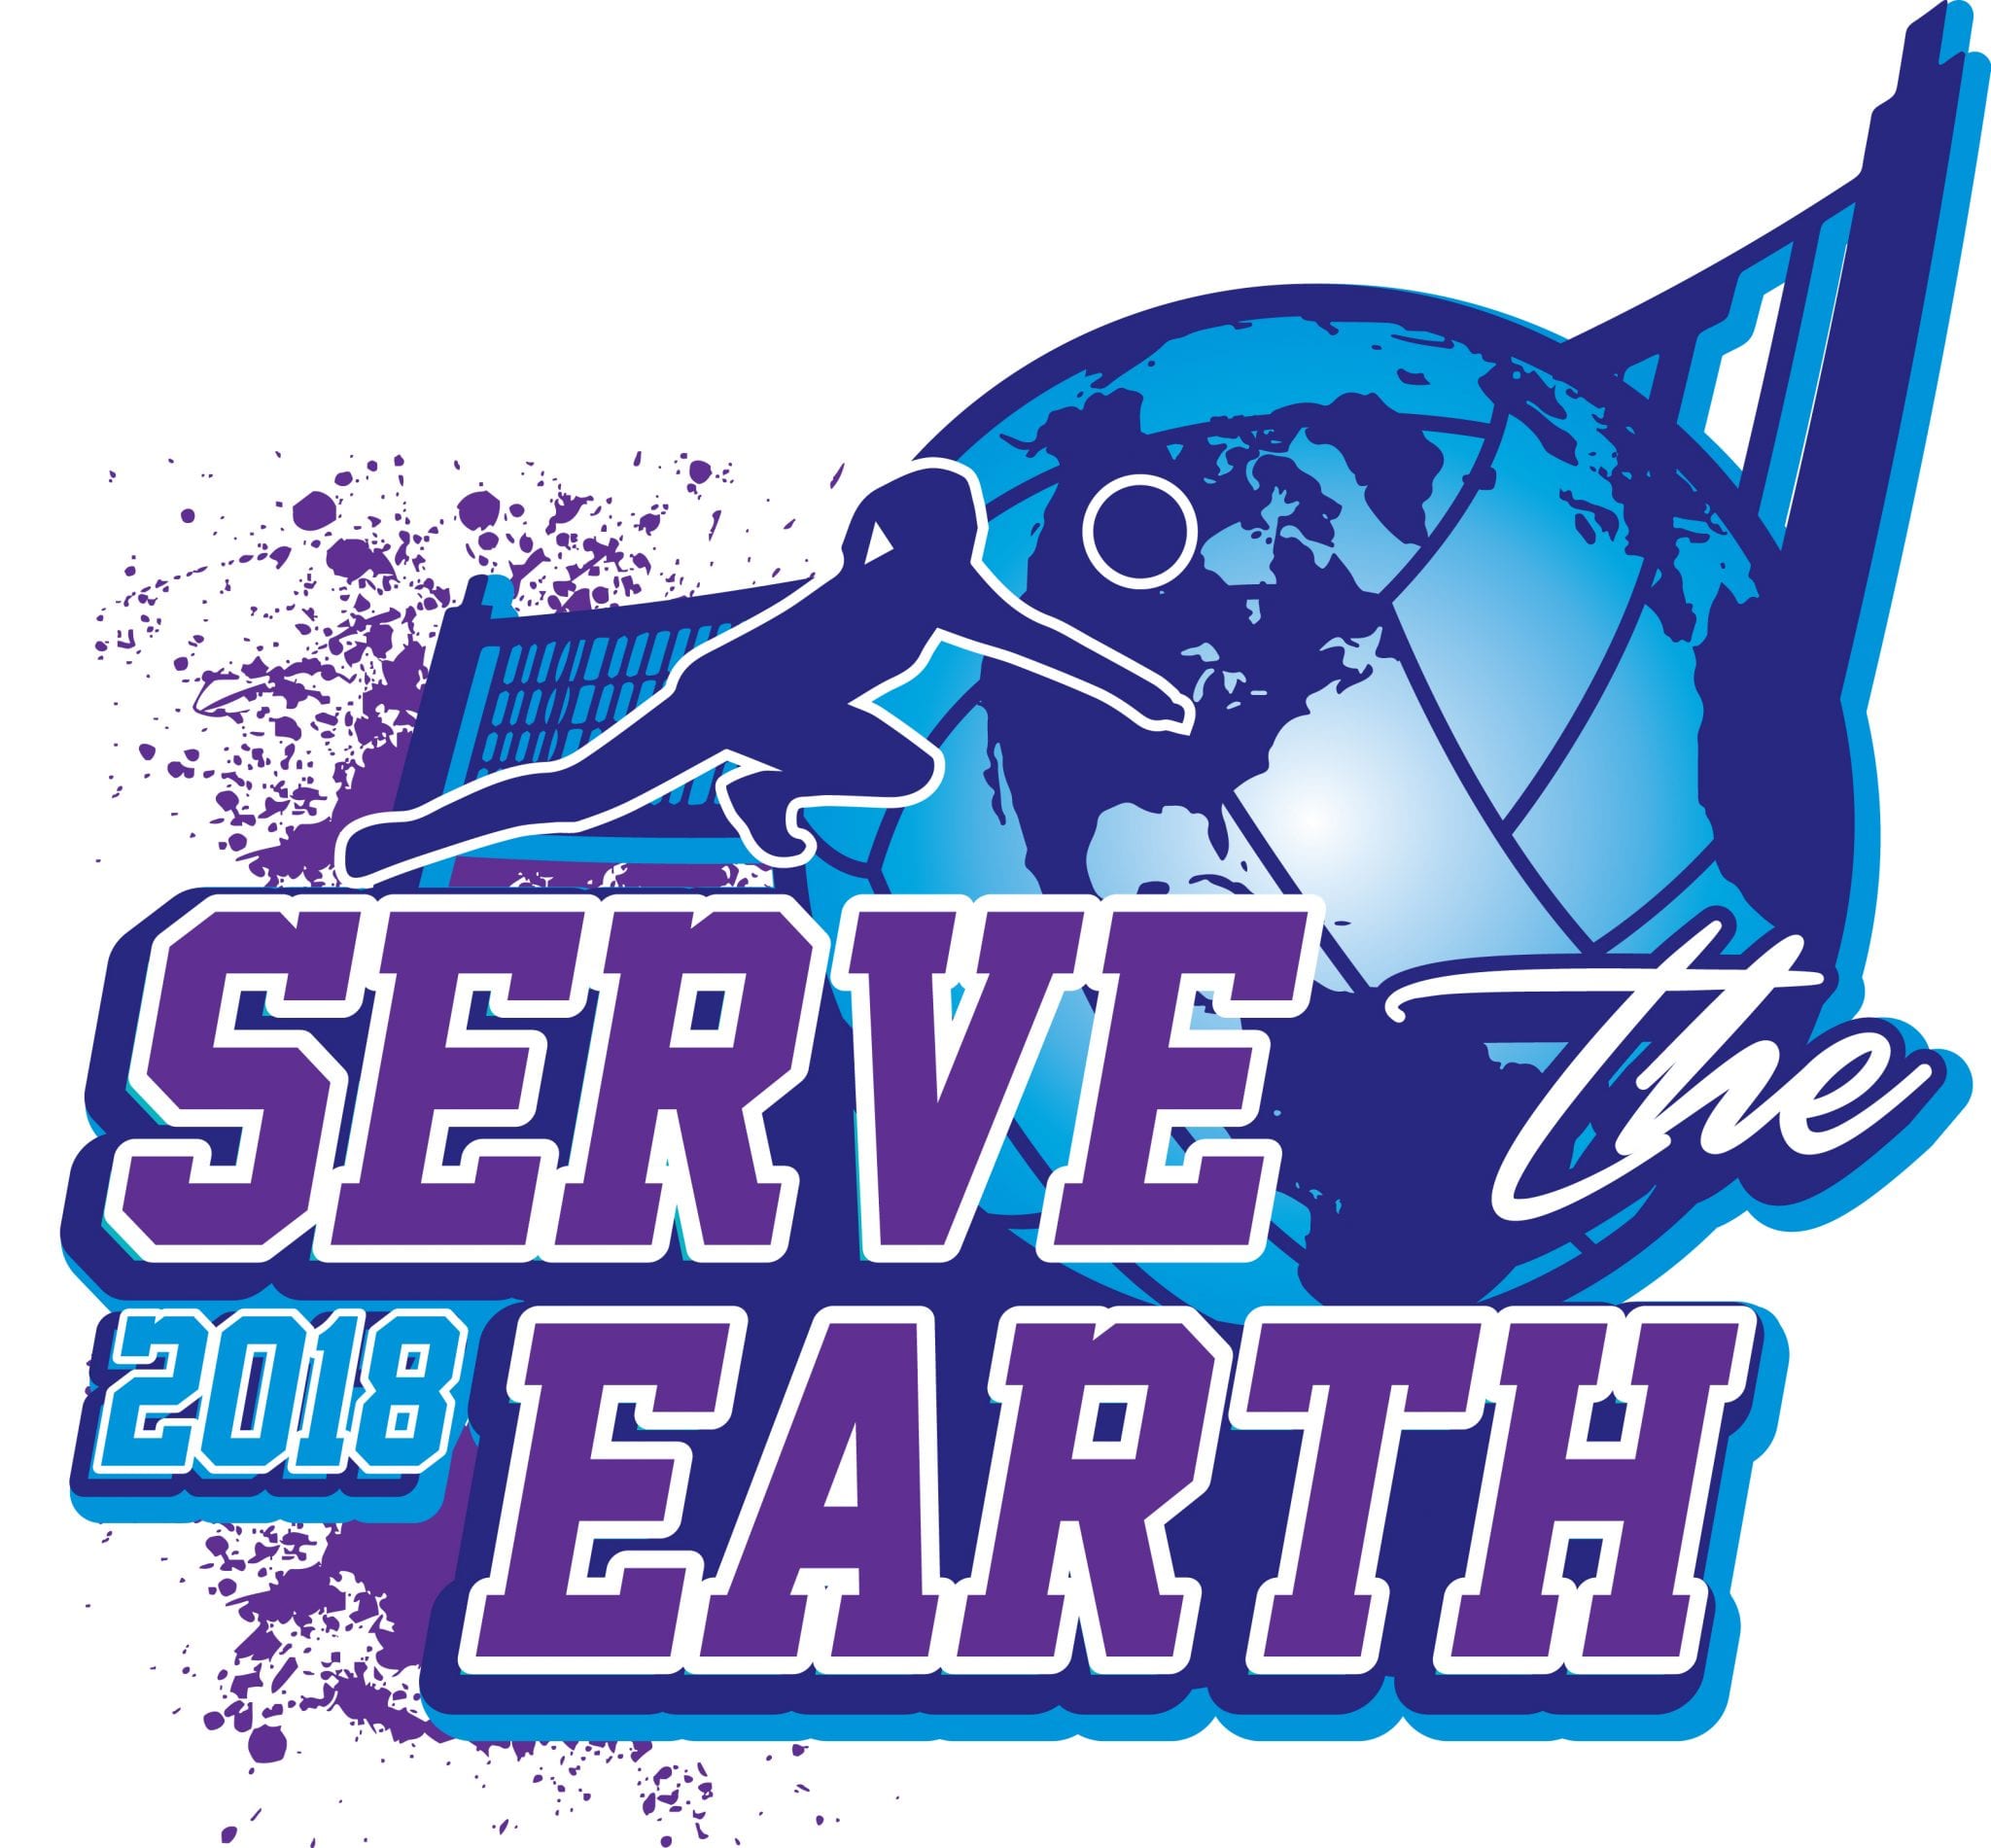 Volleyball Serve The Earth 2018 T Shirt Vector Logo Design For